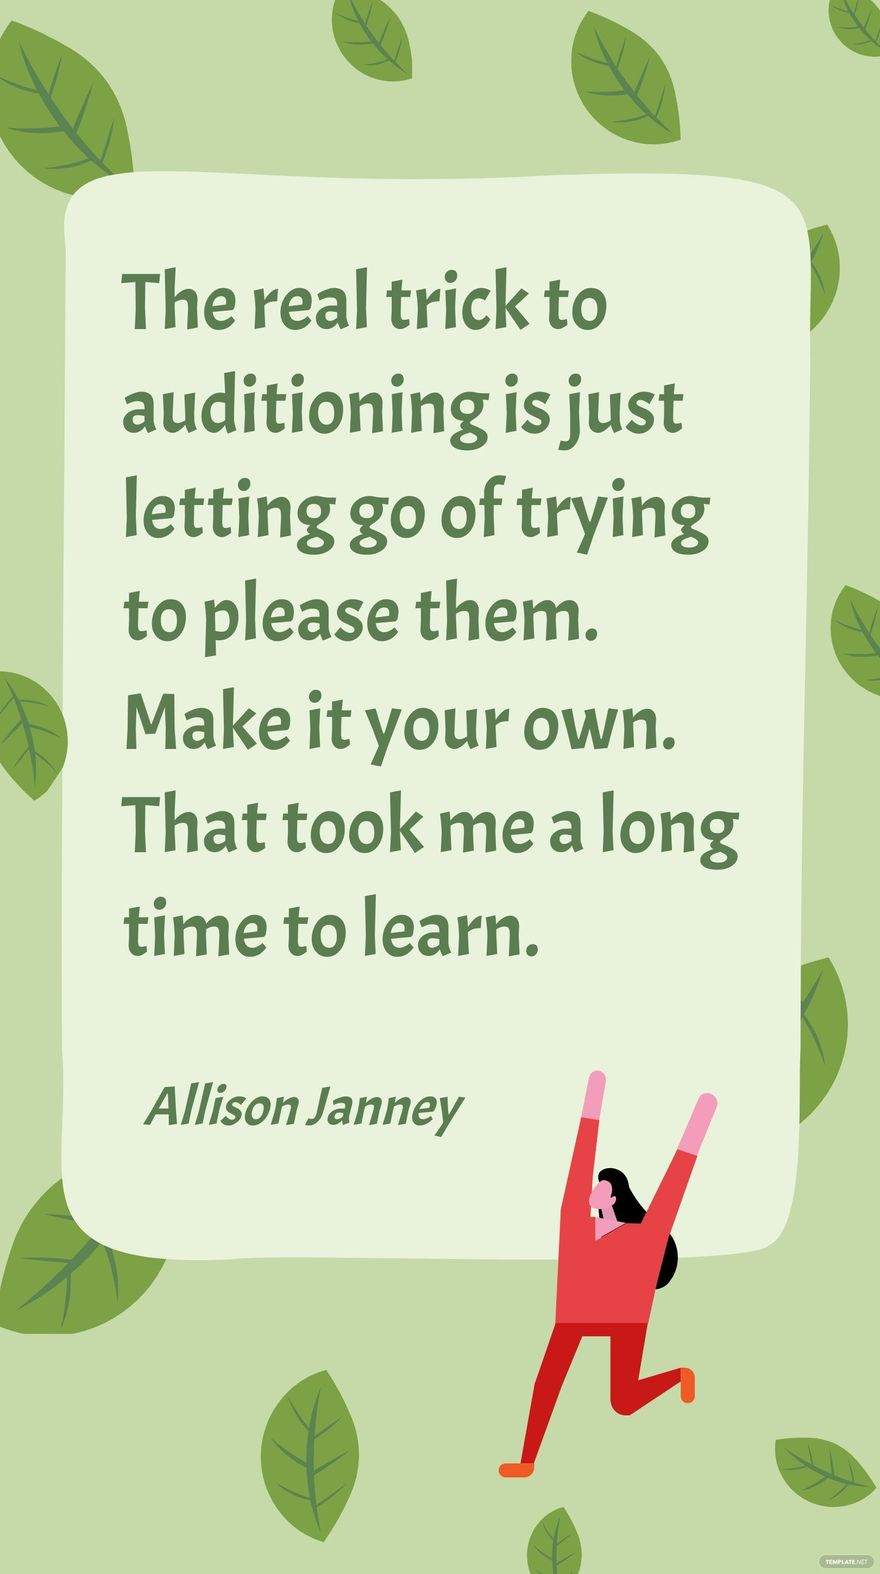 Allison Janney - The real trick to auditioning is just letting go of trying to please them. Make it your own. That took me a long time to learn. in JPG